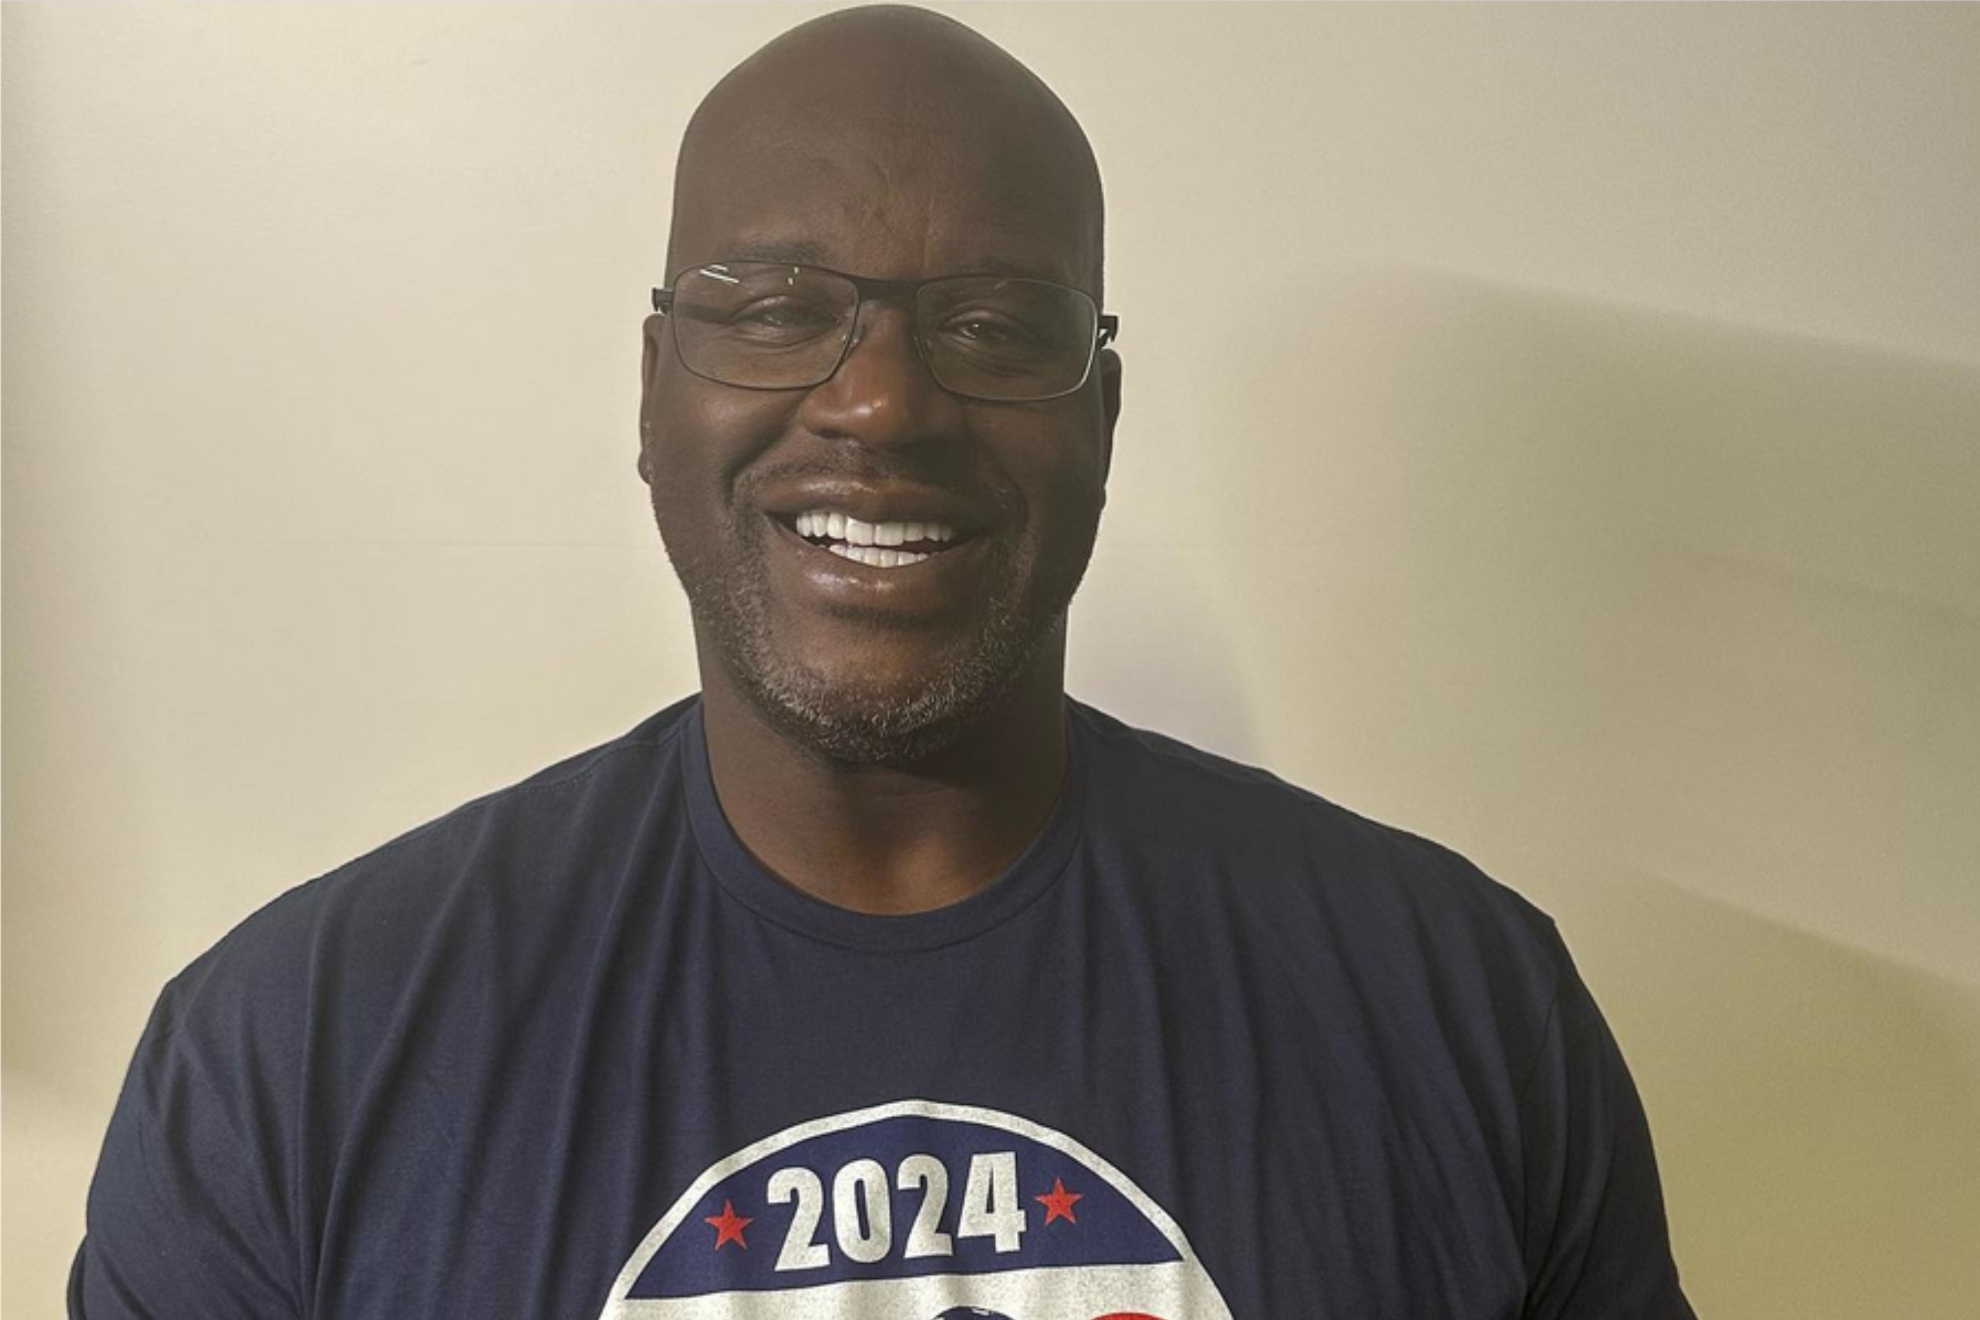 Shaquille ONeal for president in 2024?